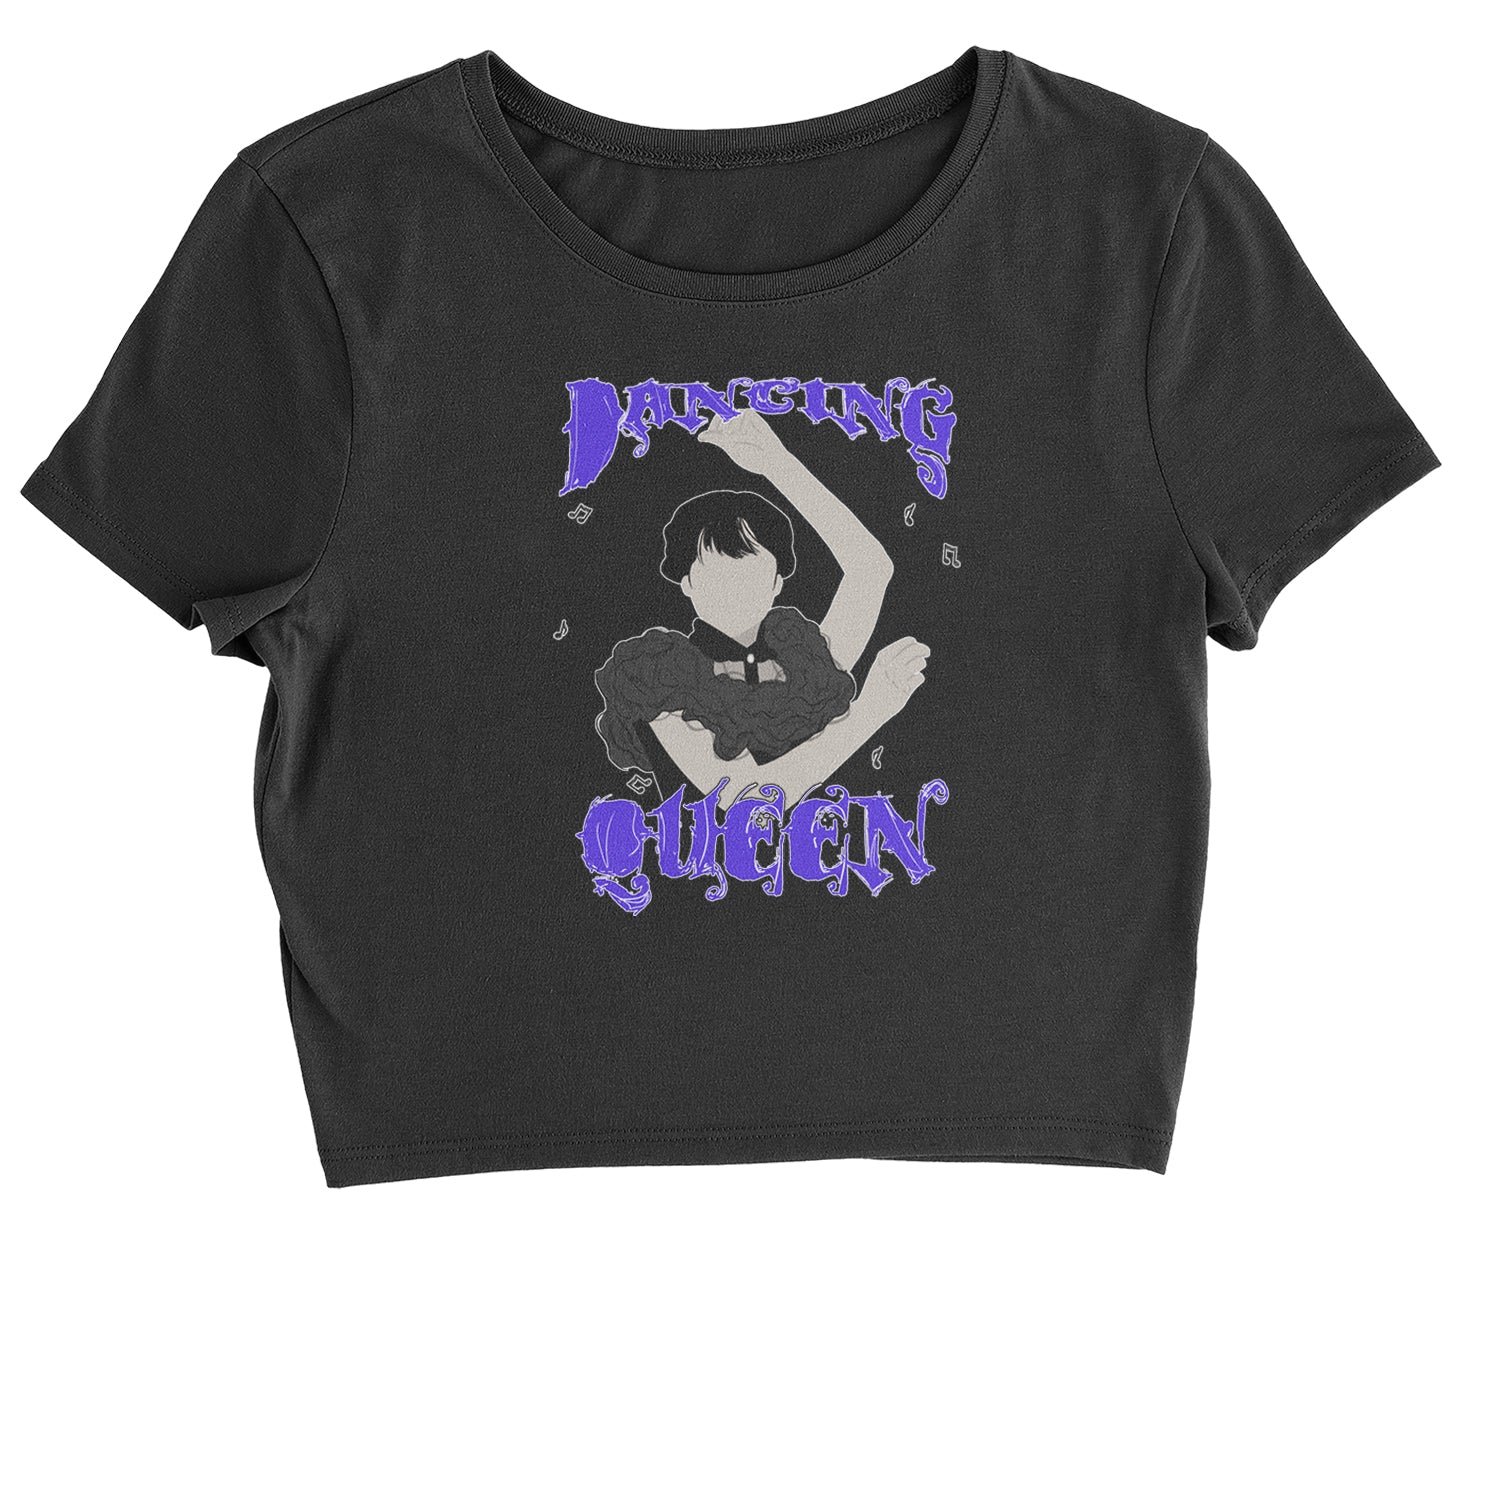 Wednesday Dancing Queen Cropped T-Shirt black, On, we, wear, wednesdays by Expression Tees